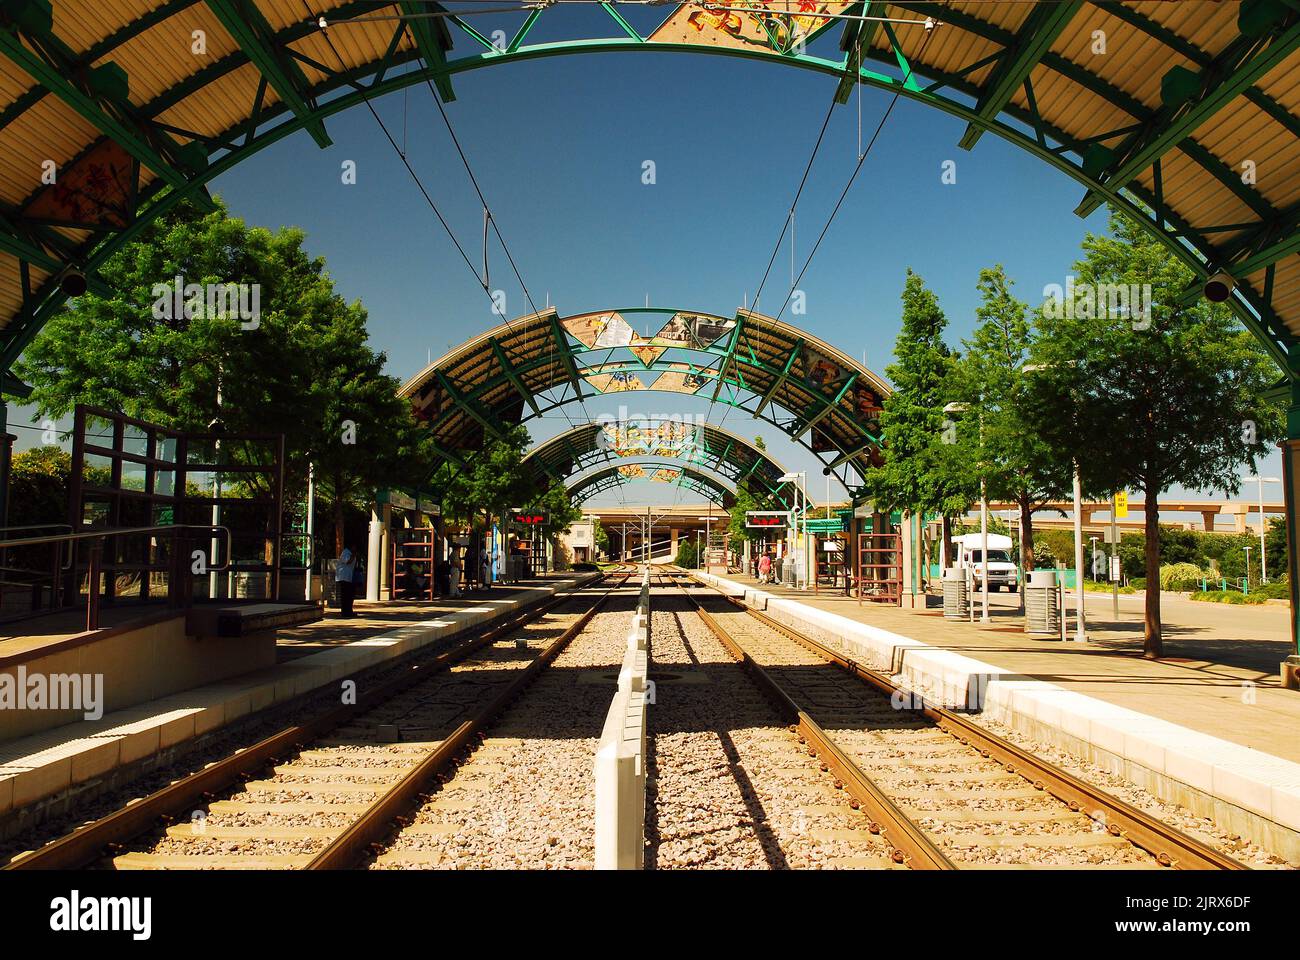 A circular metal canopy hangs over the LBJ Central Station, on the Dallas DART Light Rail Train System, a large public transportation service in Texas Stock Photo